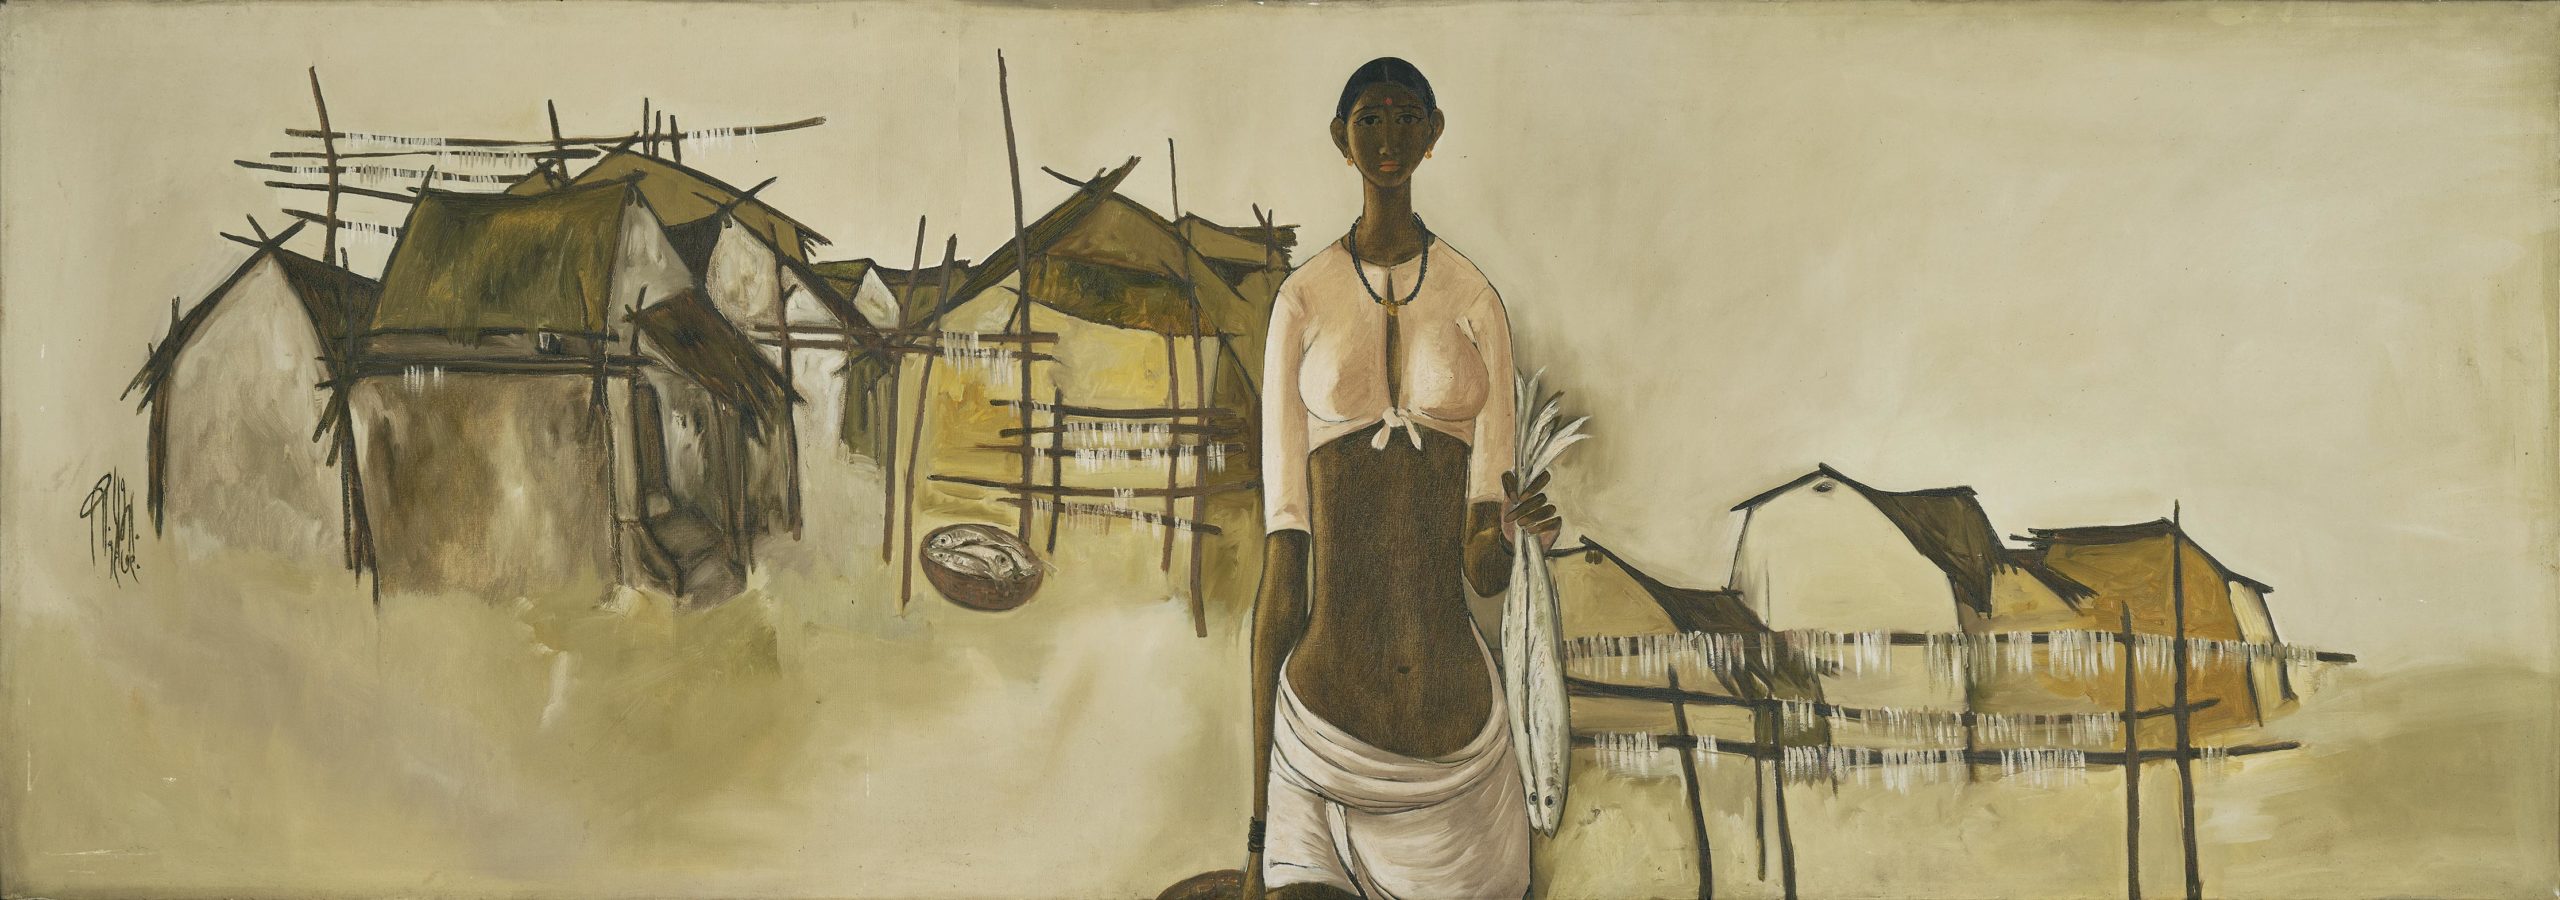 B.Prabha. Fisherwoman 1979. Courtesy of Dhoomimal Gallery scaled